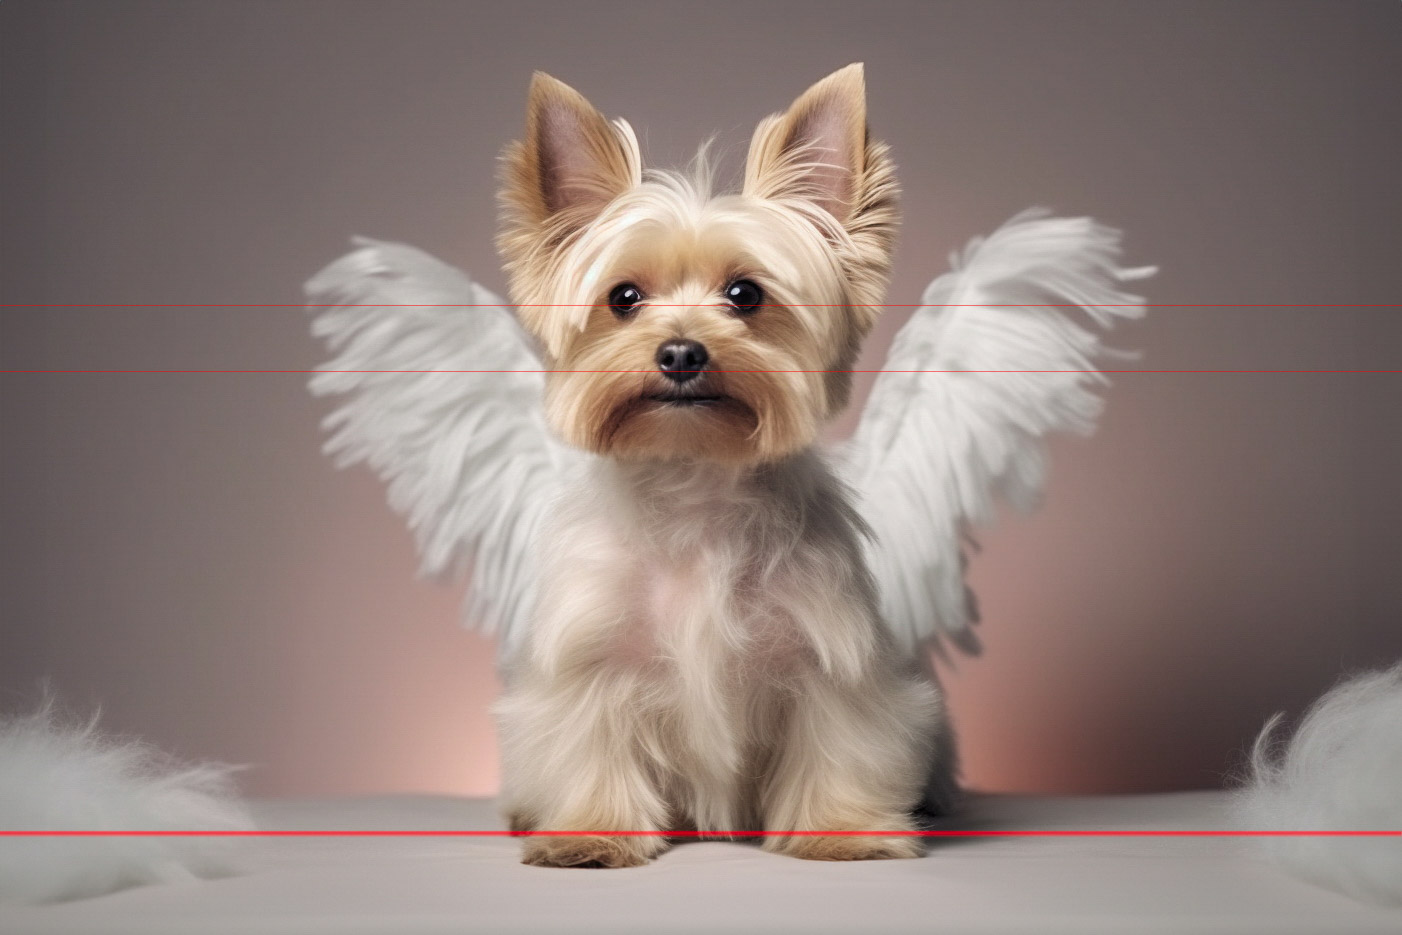 A picture of an angelic Yorkie is sitting upright with white, feathered angel wings attached to its back. The dog's fur is neatly groomed, and it gazes directly at the viewer. The background is softly lit with a gradient from dark to light, creating a warm, gentle ambiance.